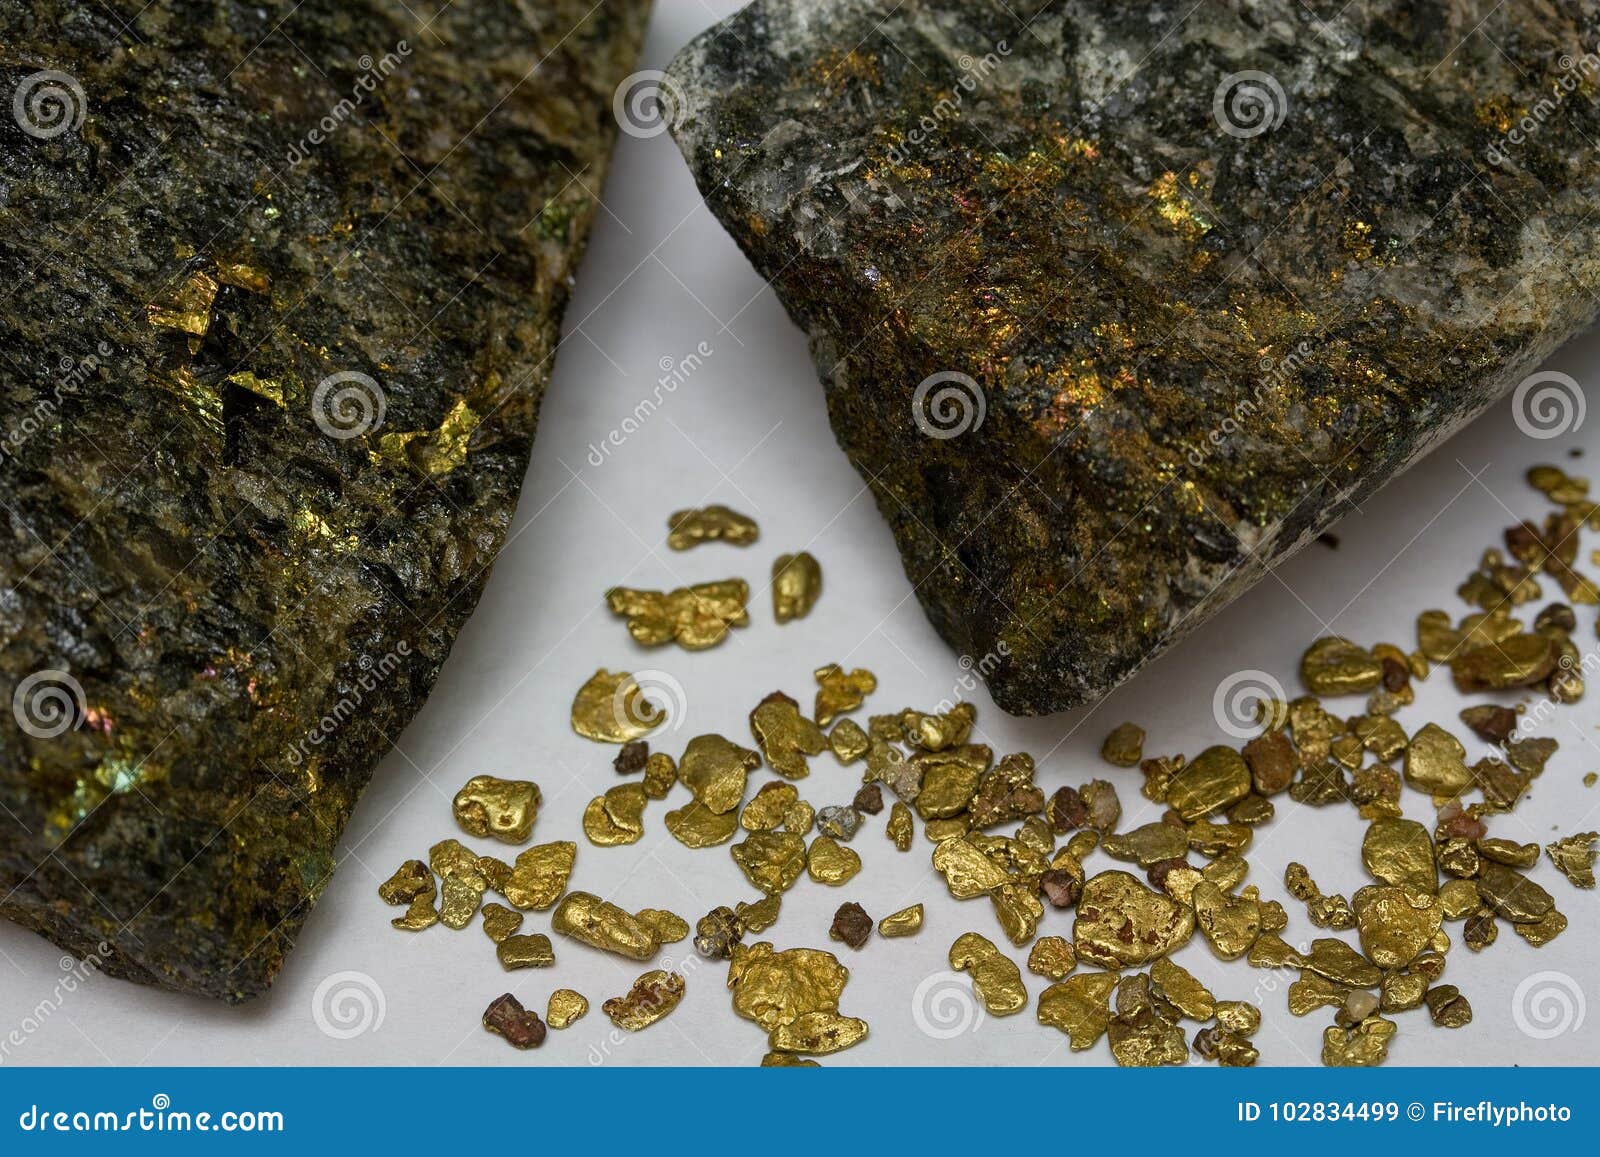 high-grade gold ore and california placer gold nuggets